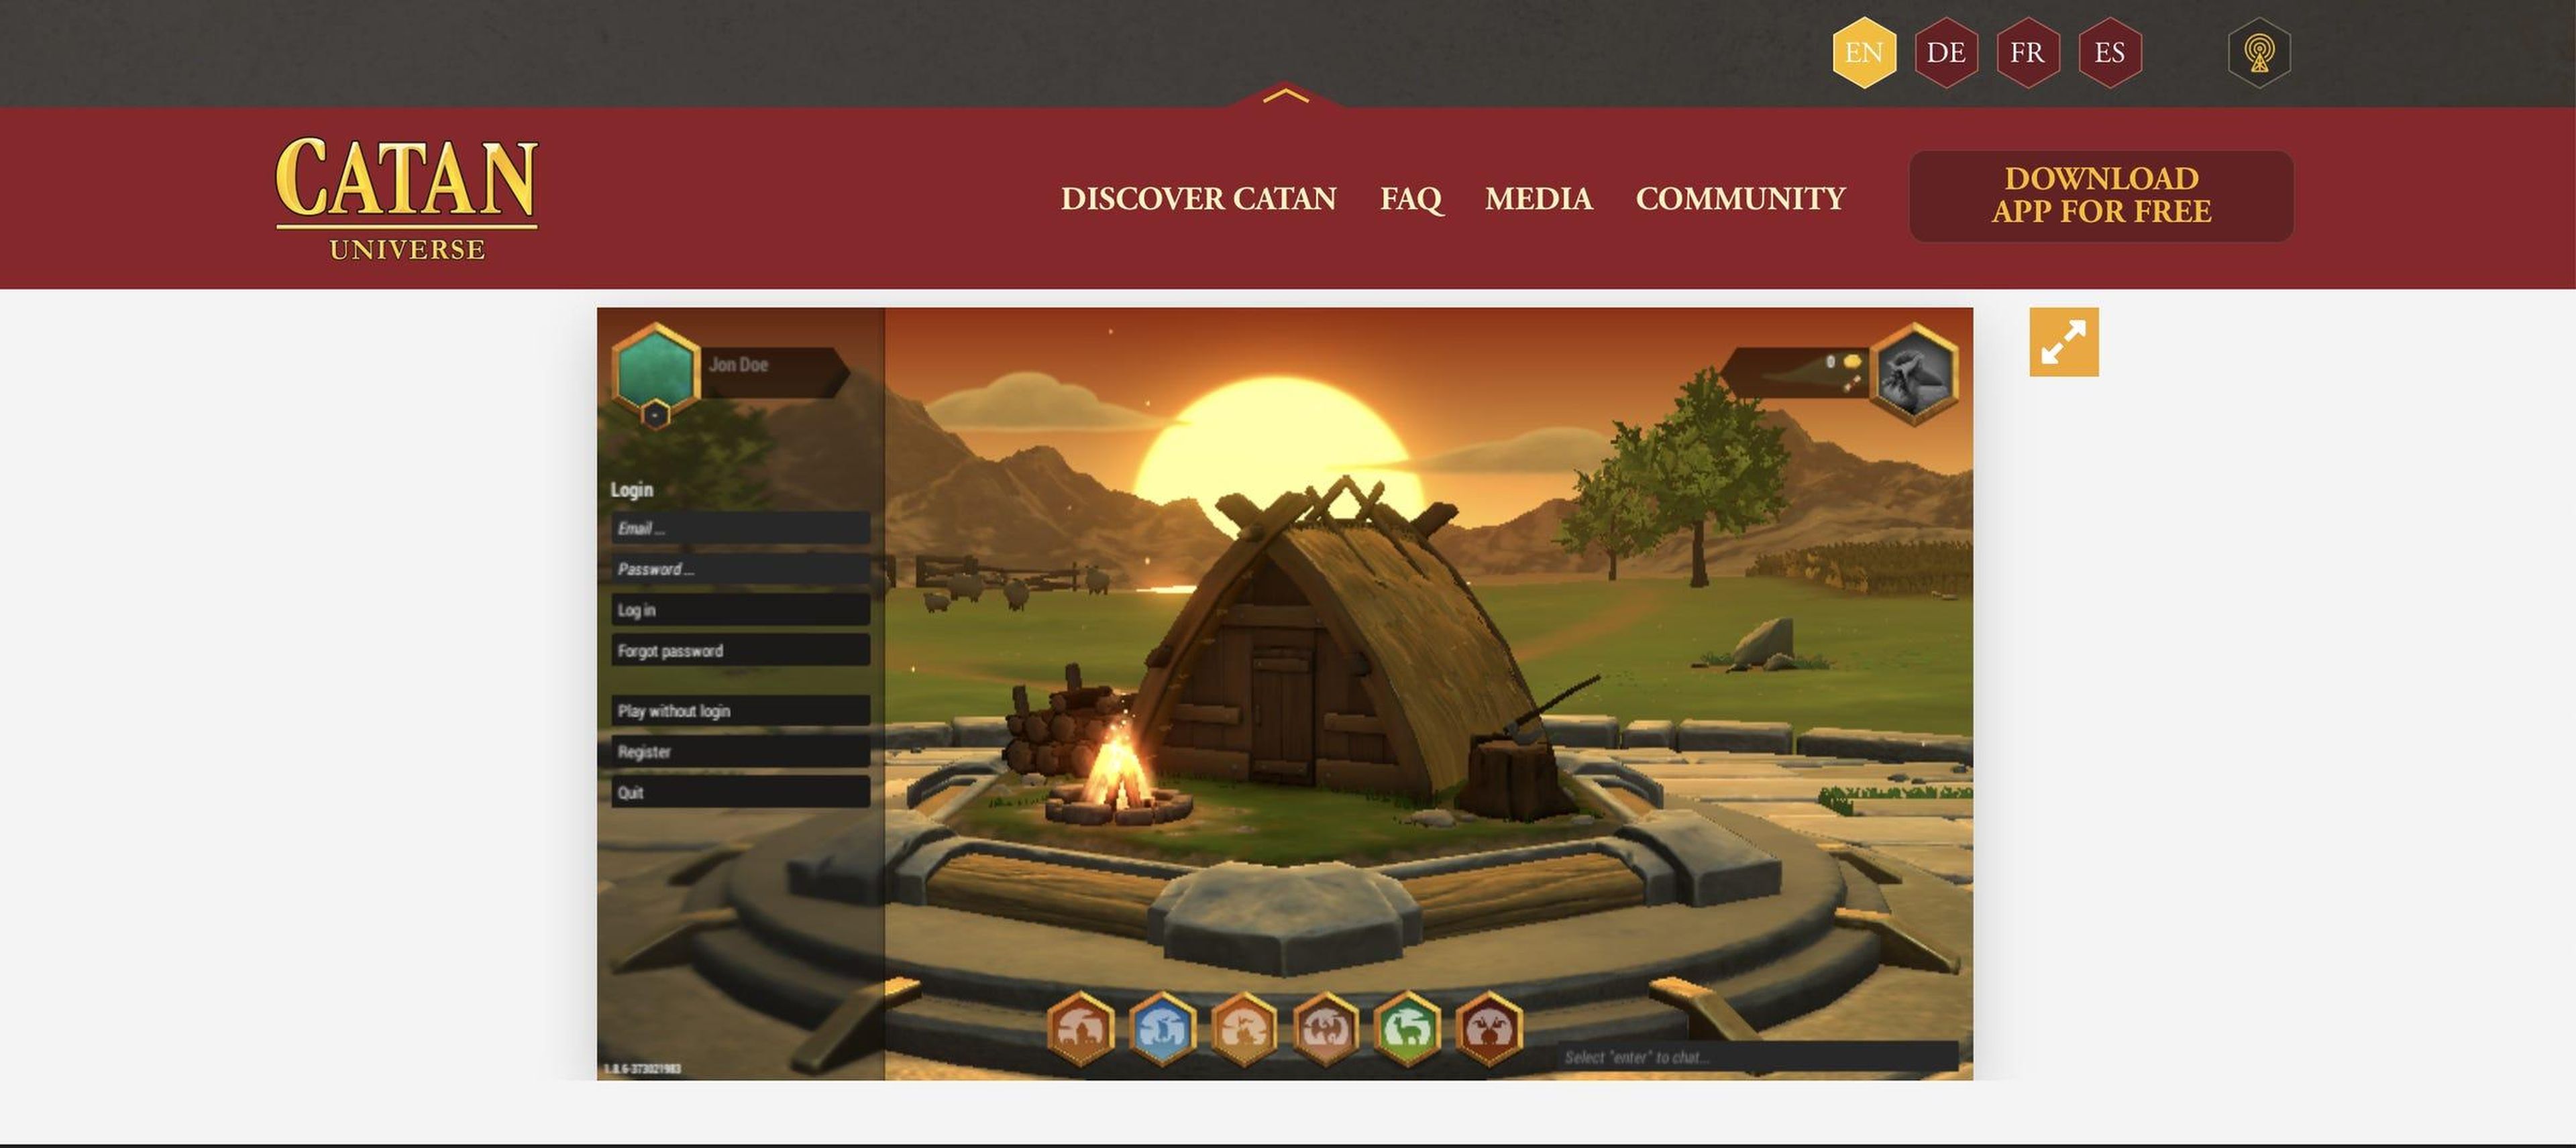 The opening screen of Catan Universe.